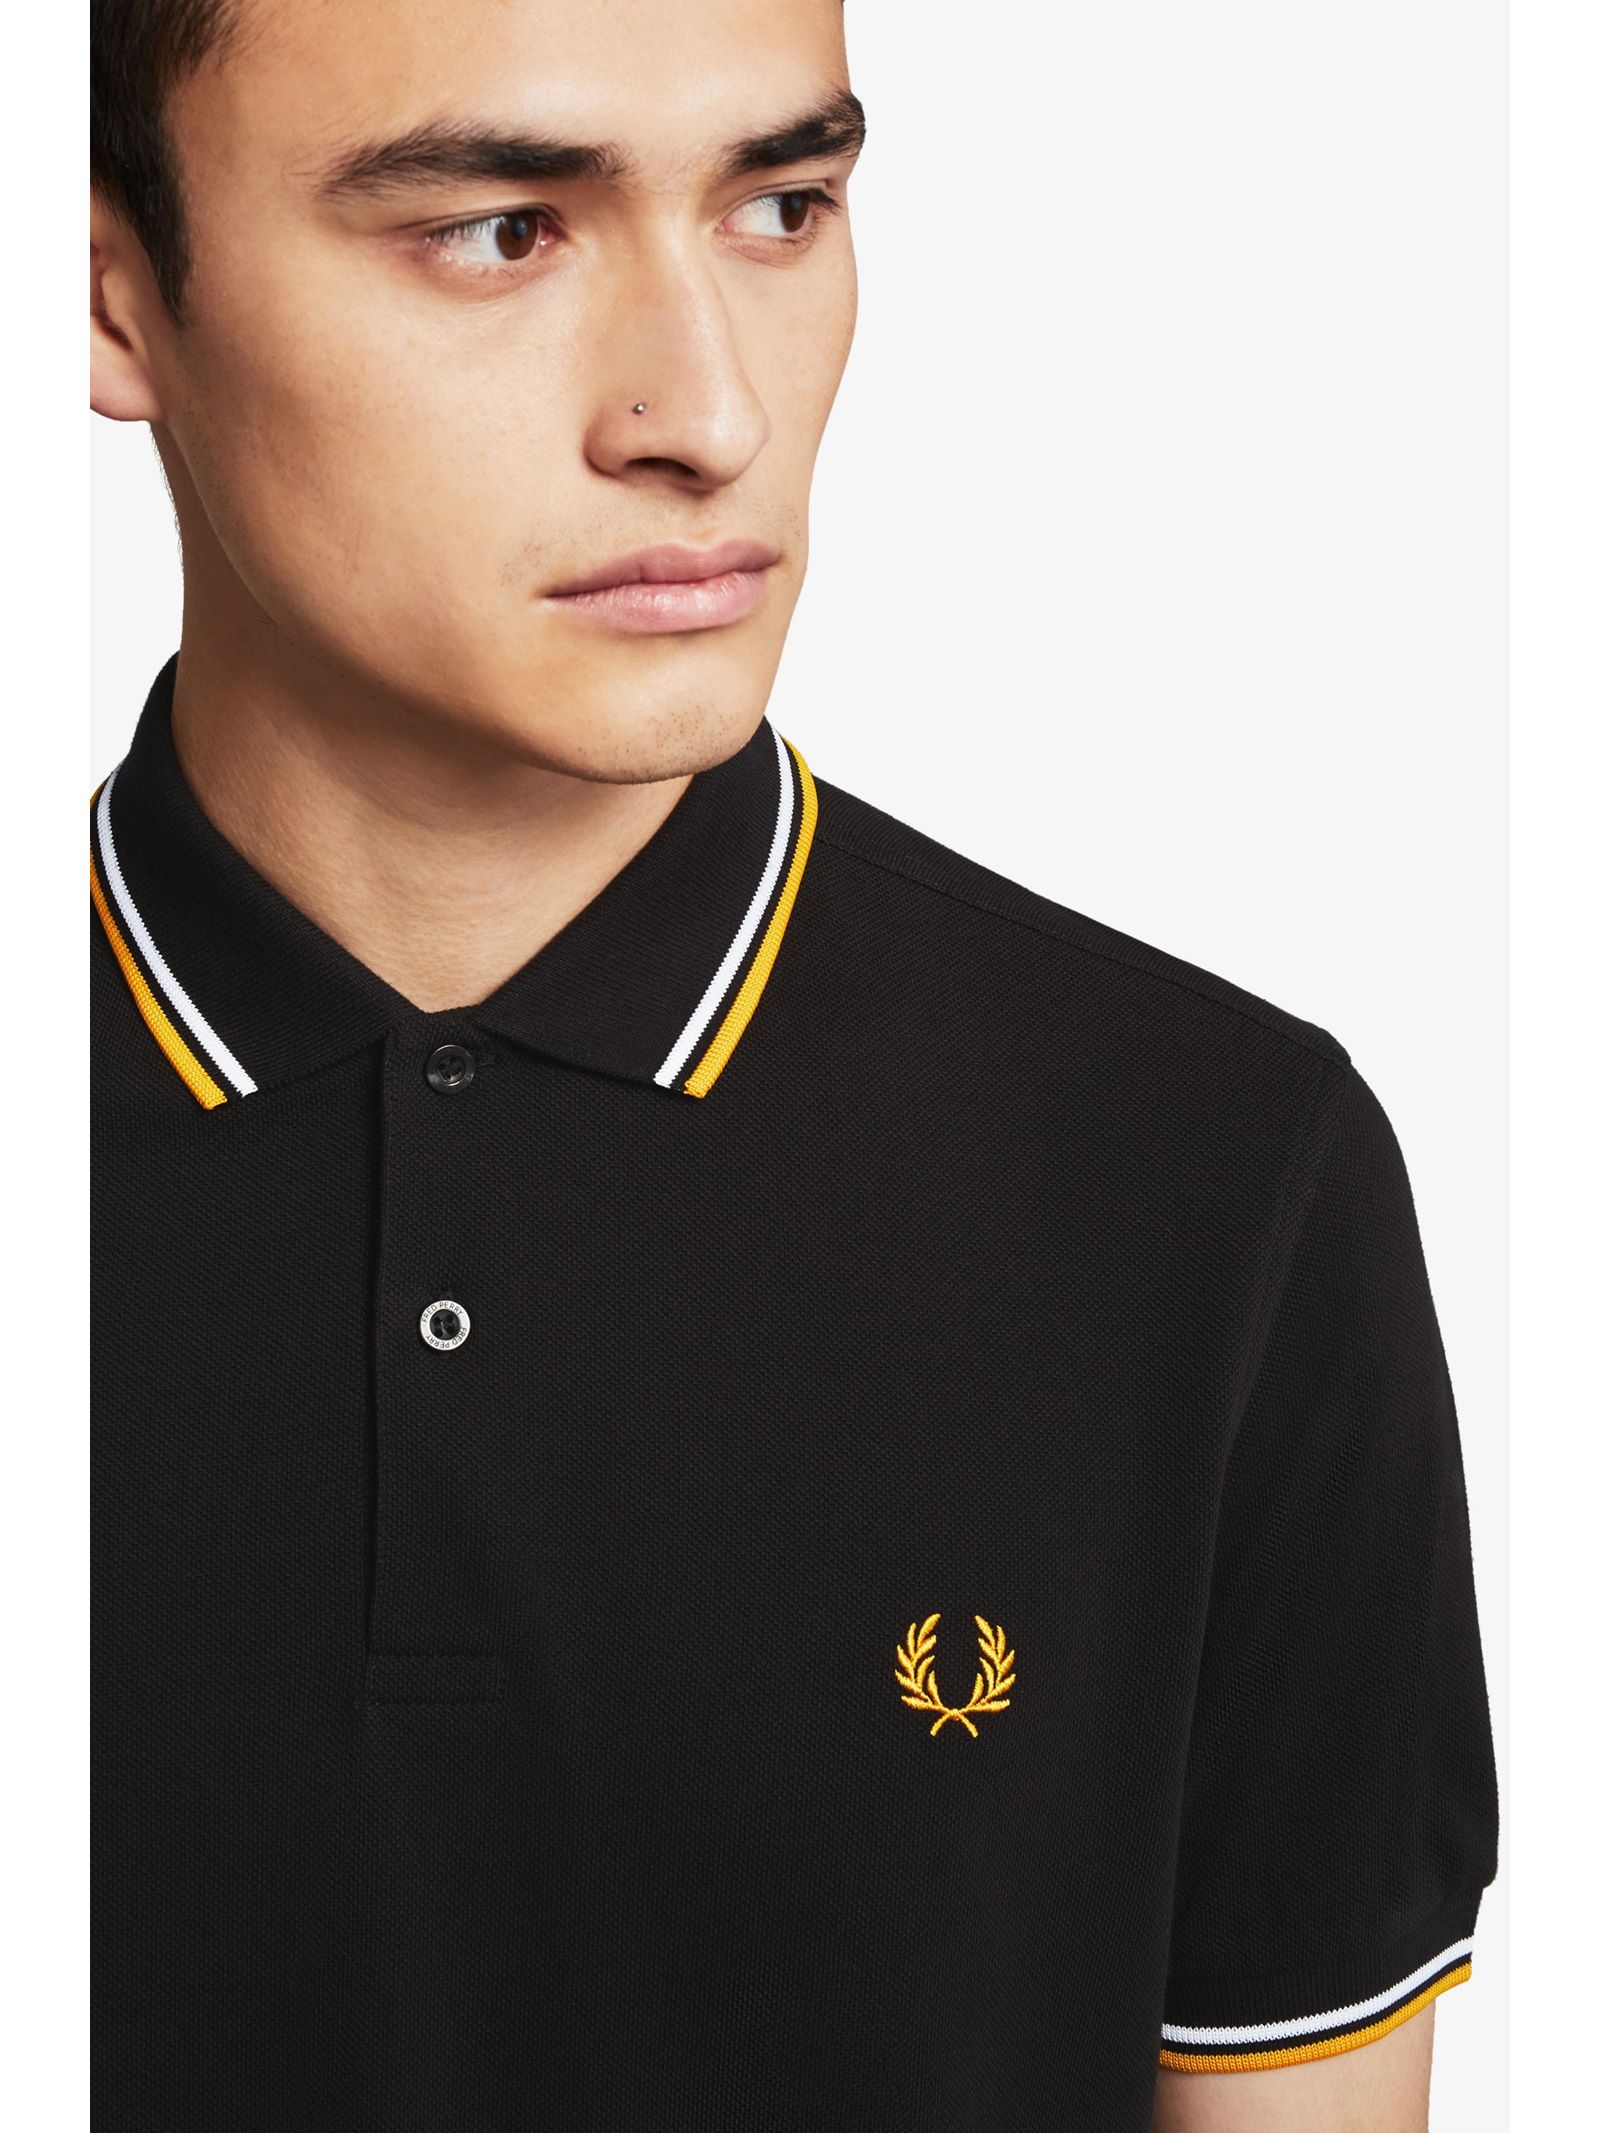 Fred Perry Twin Tipped Fred Perry Shirt in Black / White / Gold ...